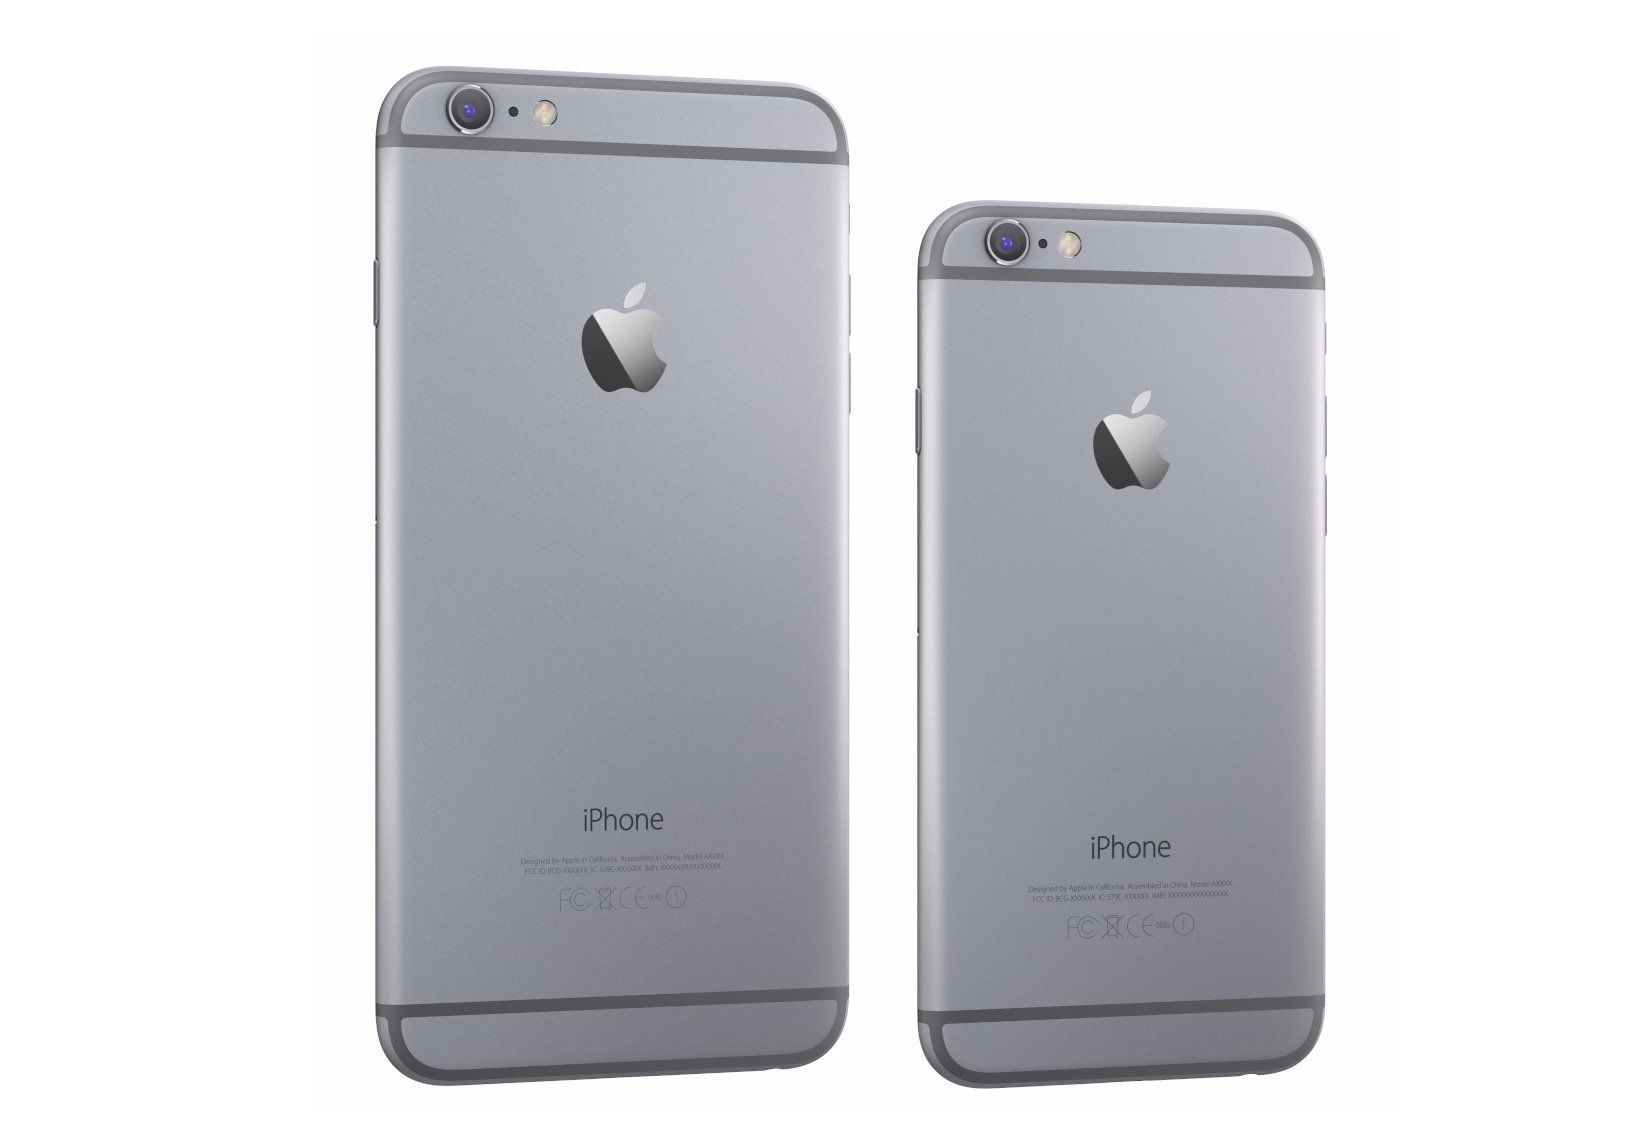 apple iphone 6 space gray